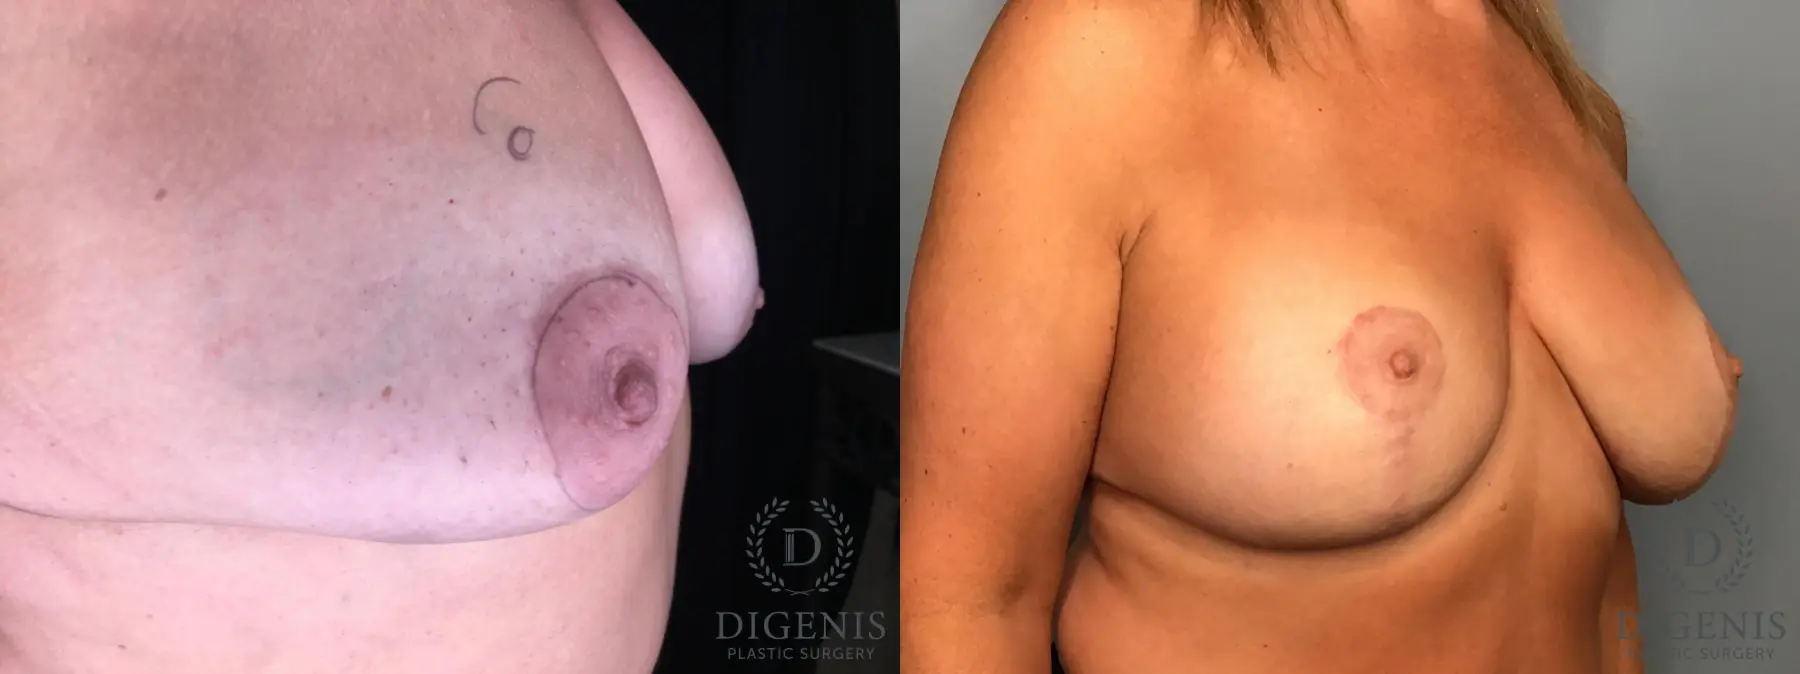 Mastopexy: Patient 2 - Before and After 4